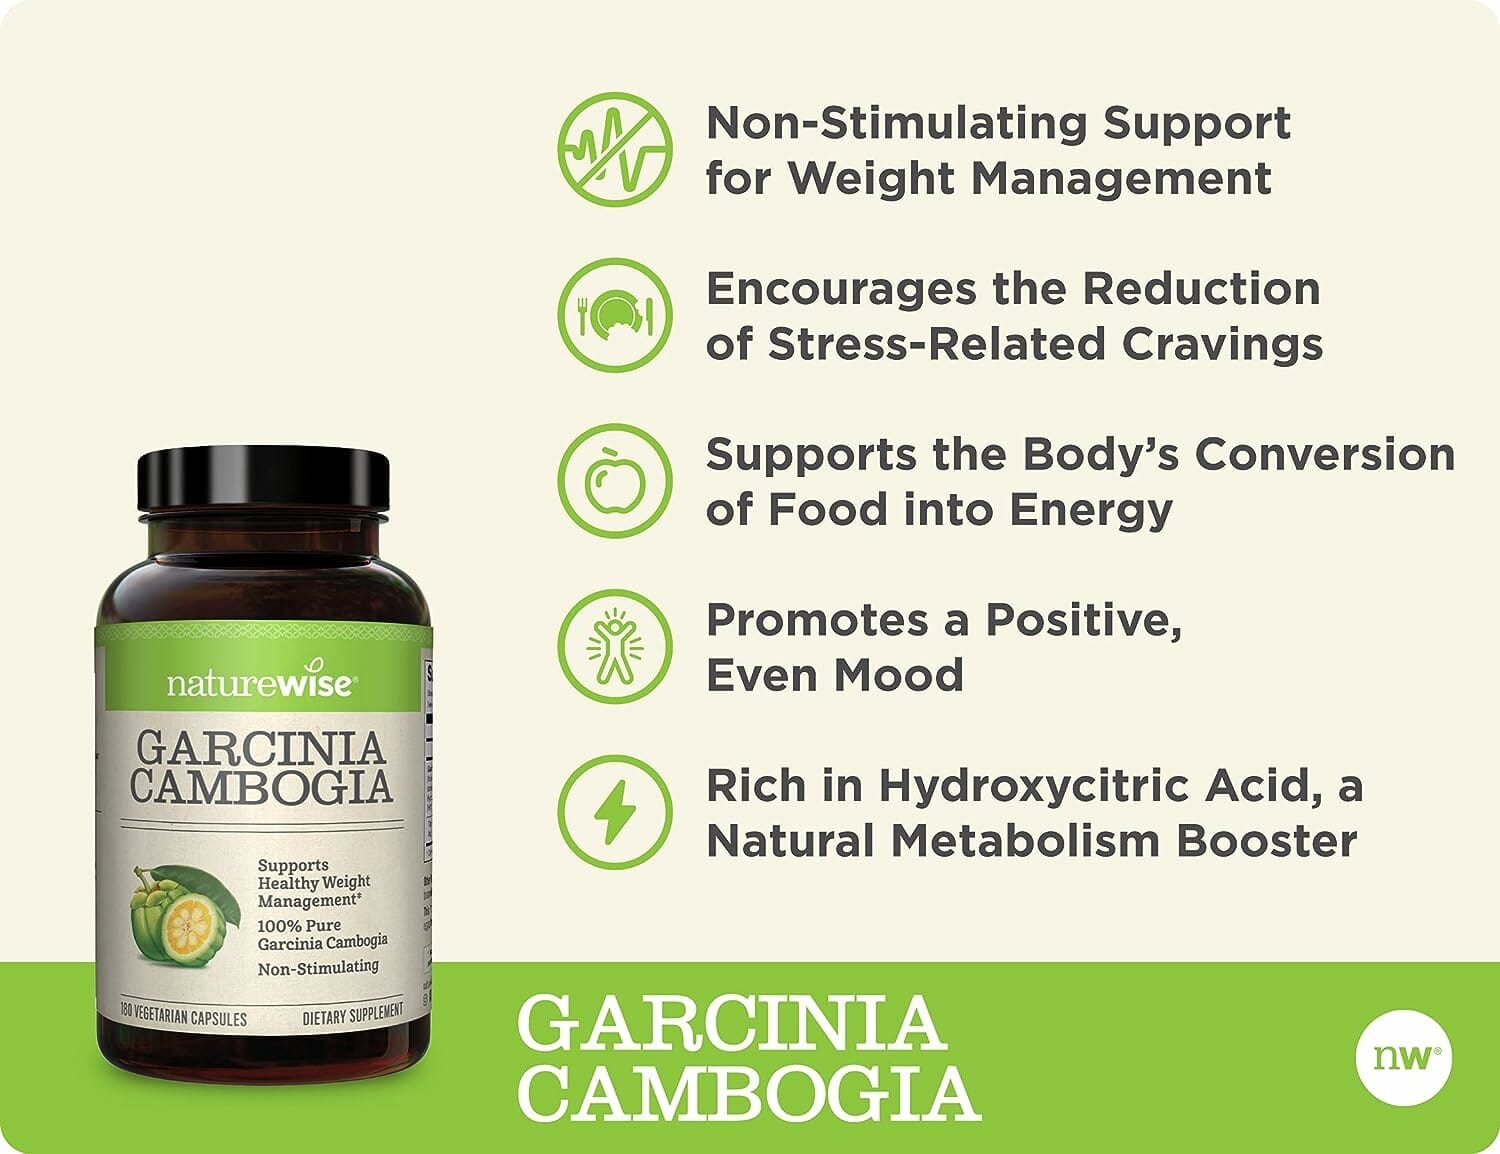 naturewise pure garcinia cambogia to boost energy 2 month supply 100 natural hca extract concentrated to 60 to metabolis 4 1